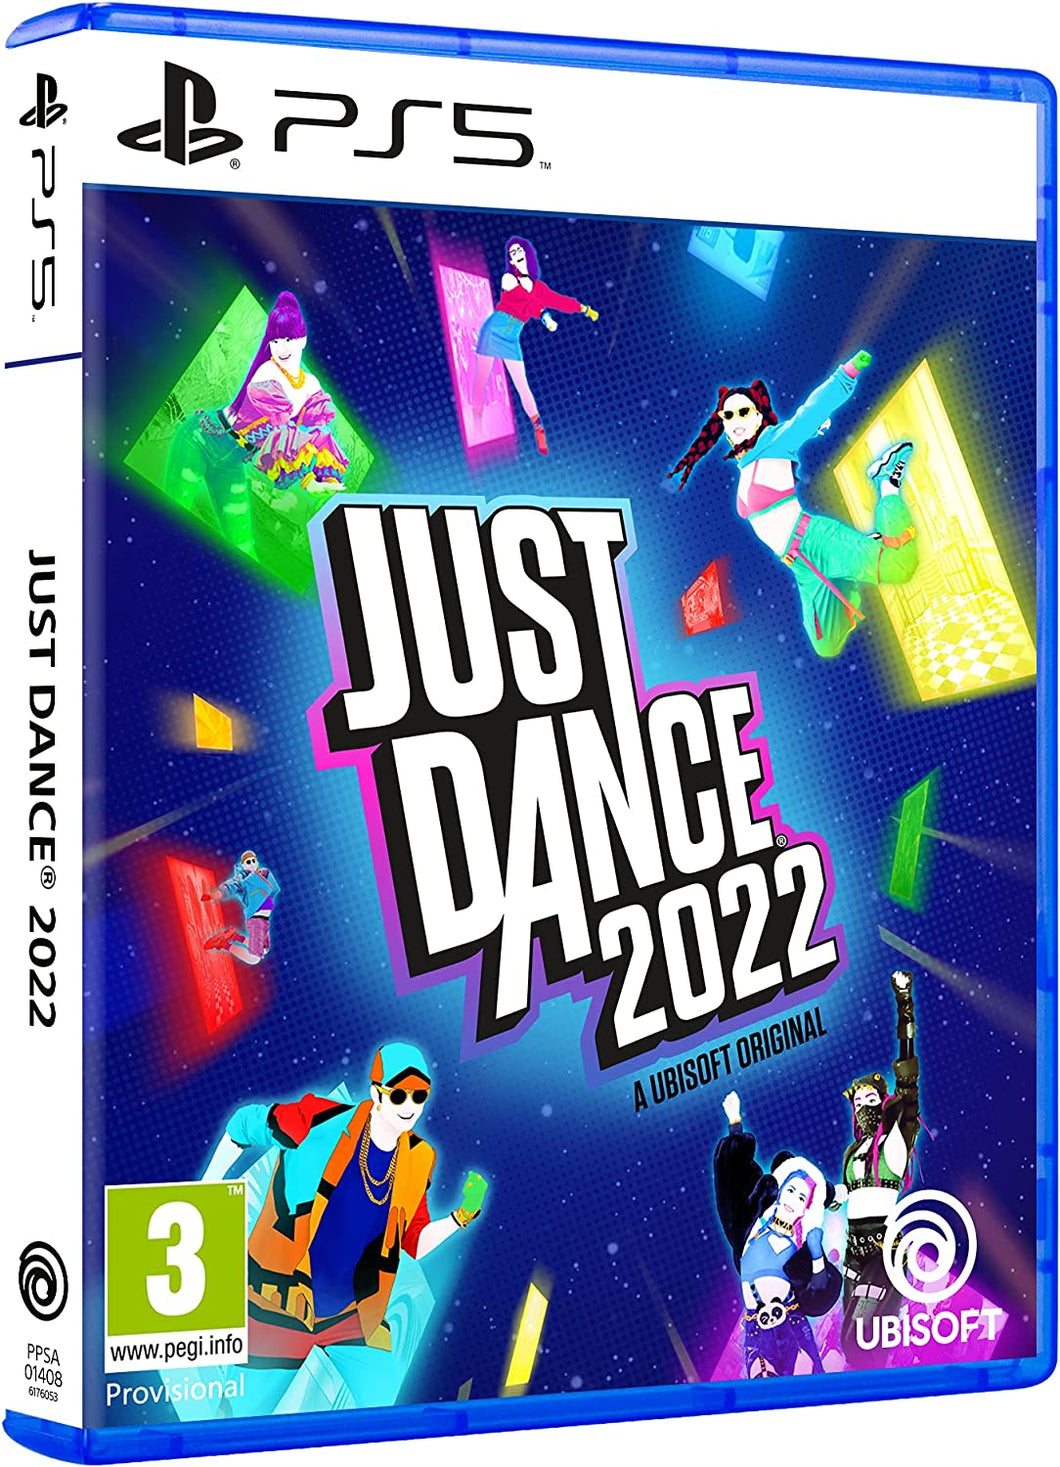 JUEGO SONY PS5 JUST DANCE 2022